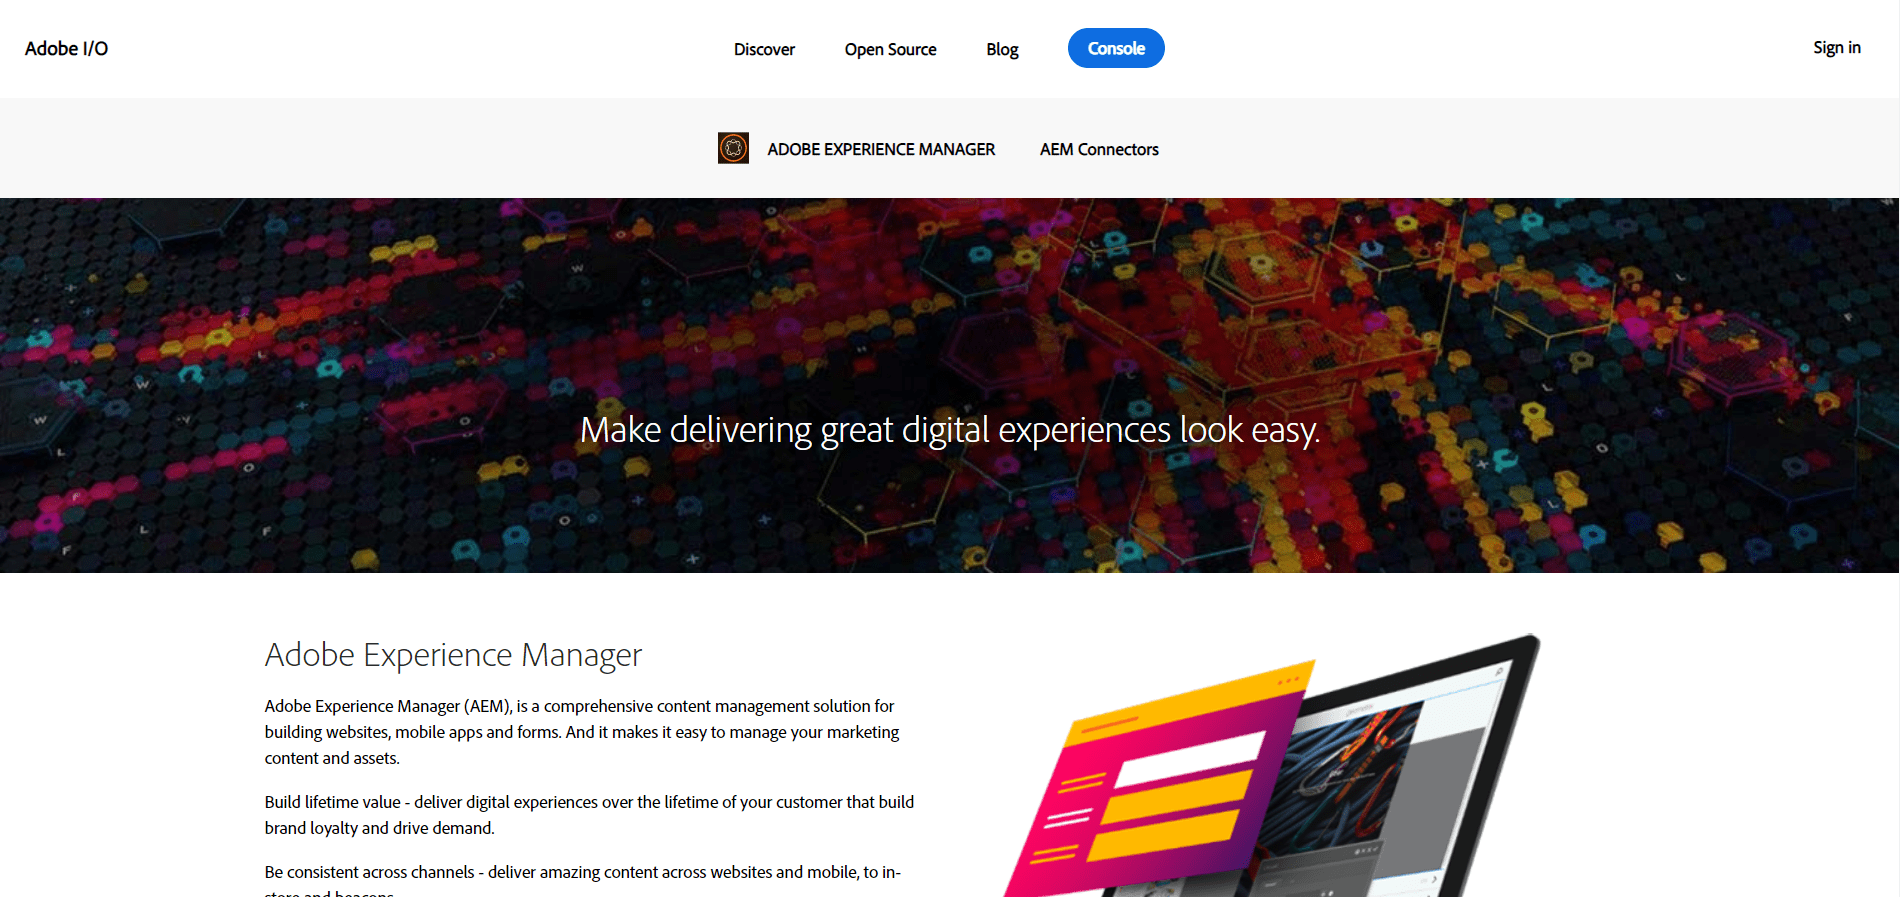 Adobe Experience Manager tool